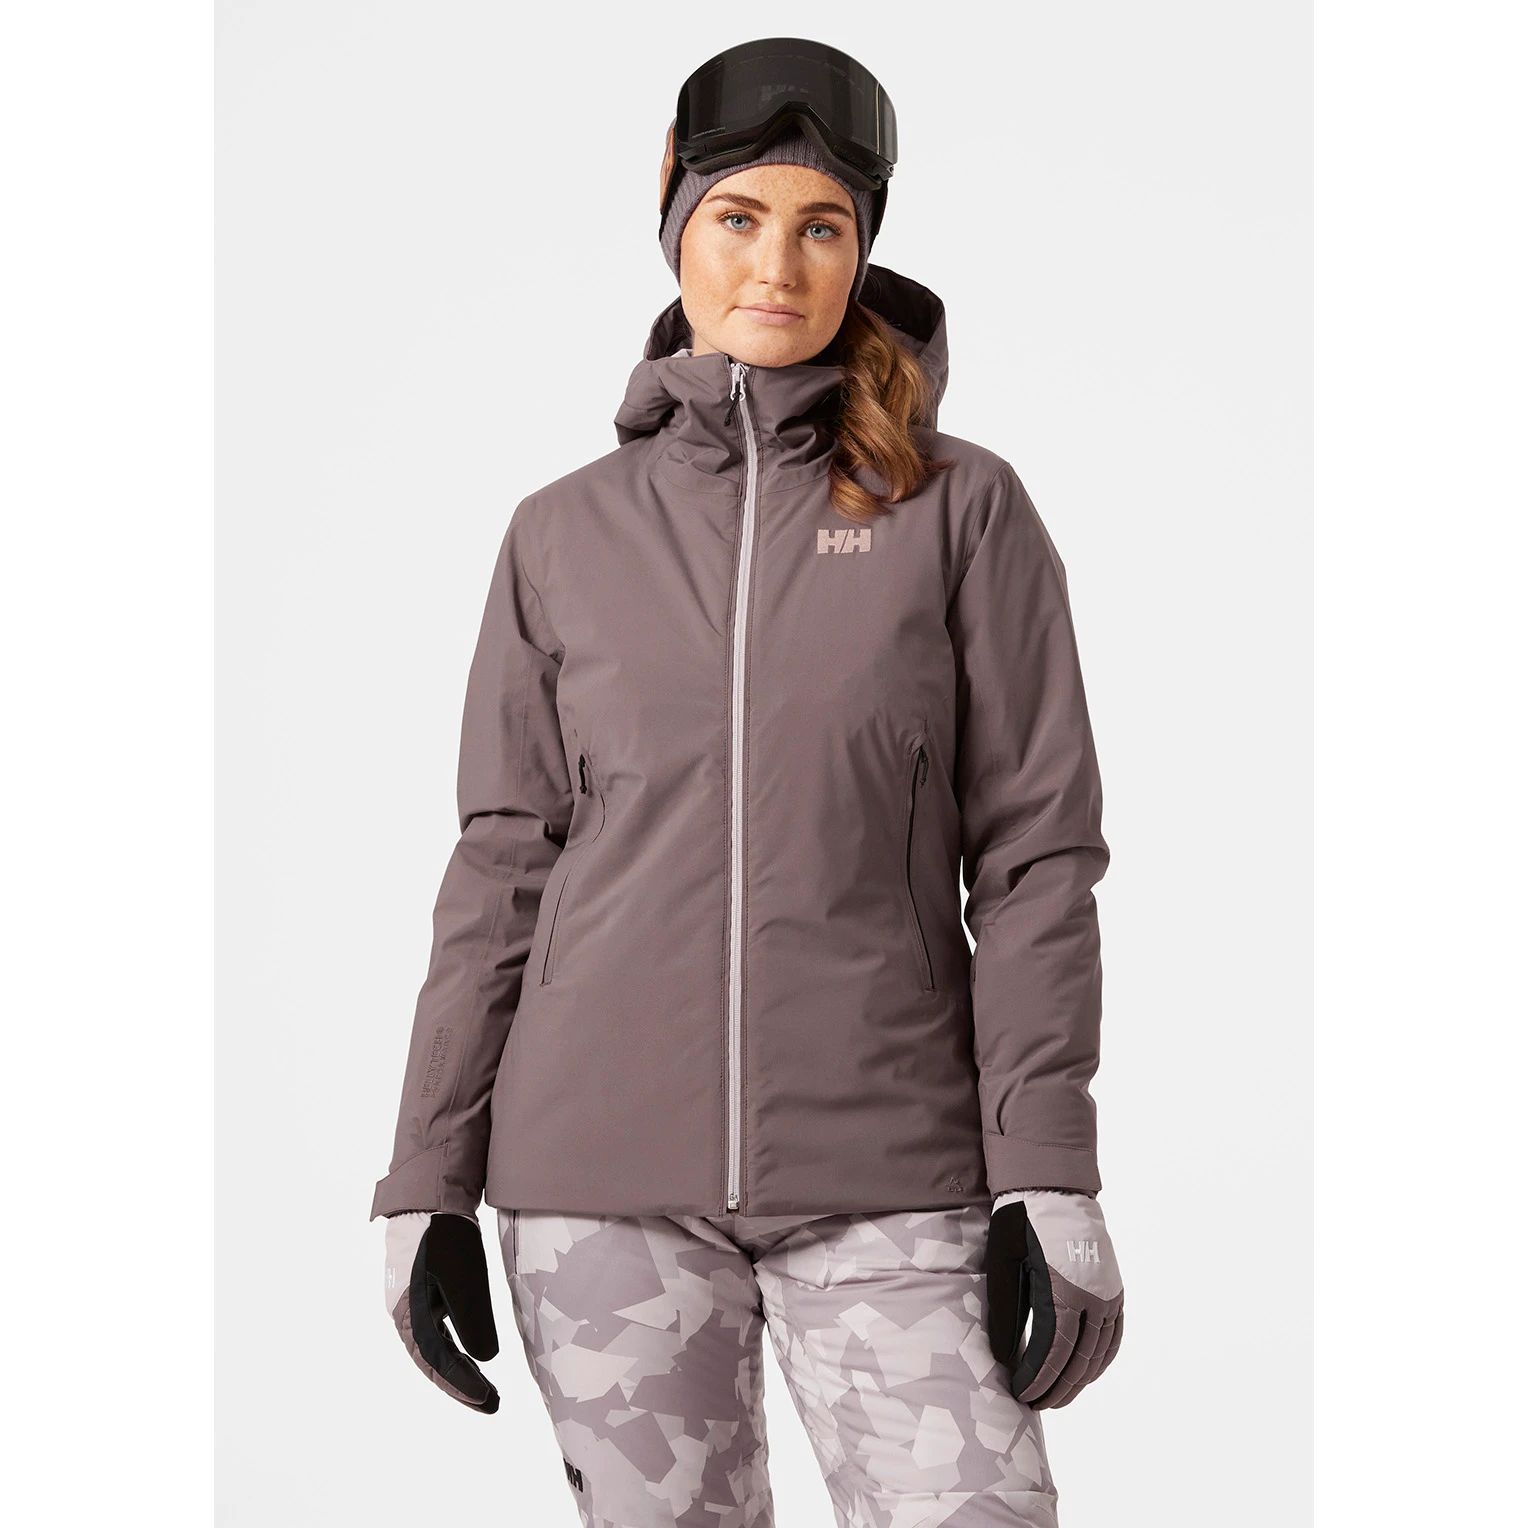 Image 1 of HELLY HANSEN - W SNOWSTAR JACKET, SPARROW GREY, XL Only - 2022